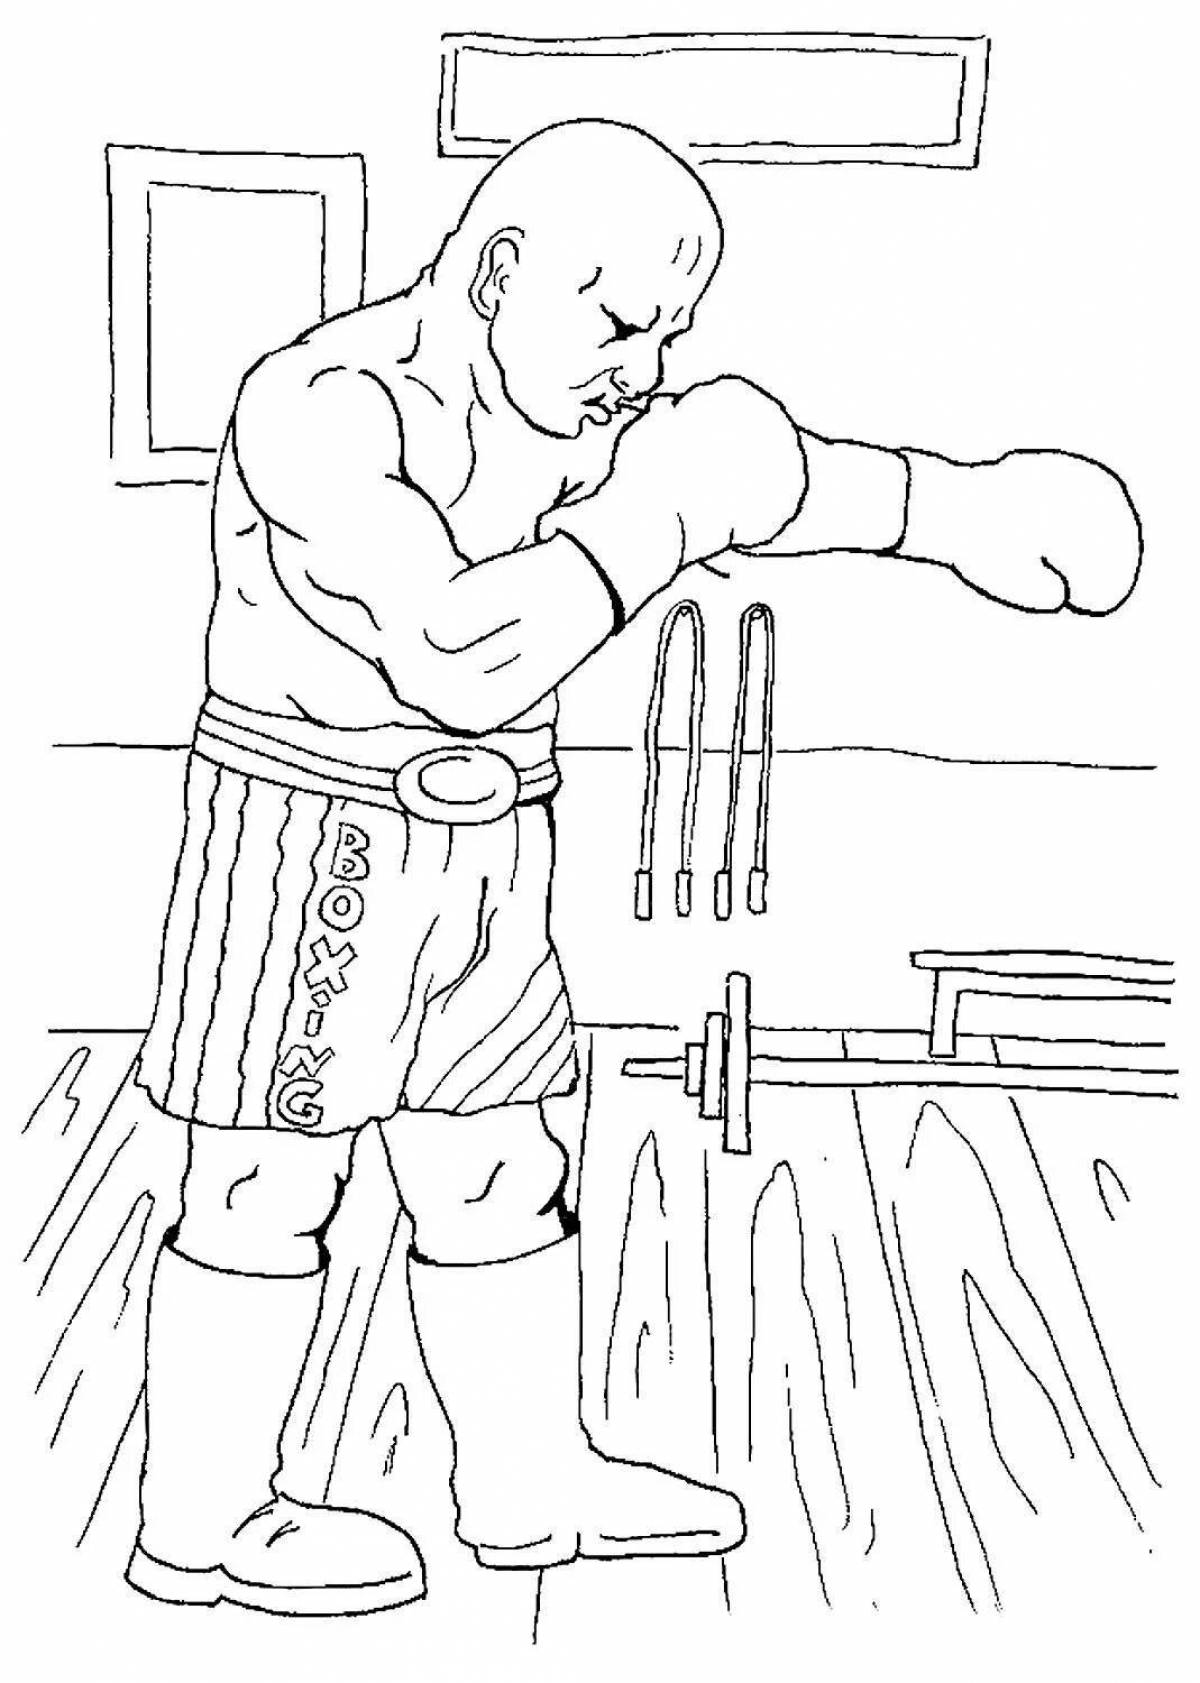 Adorable boxing and boo coloring book for kids